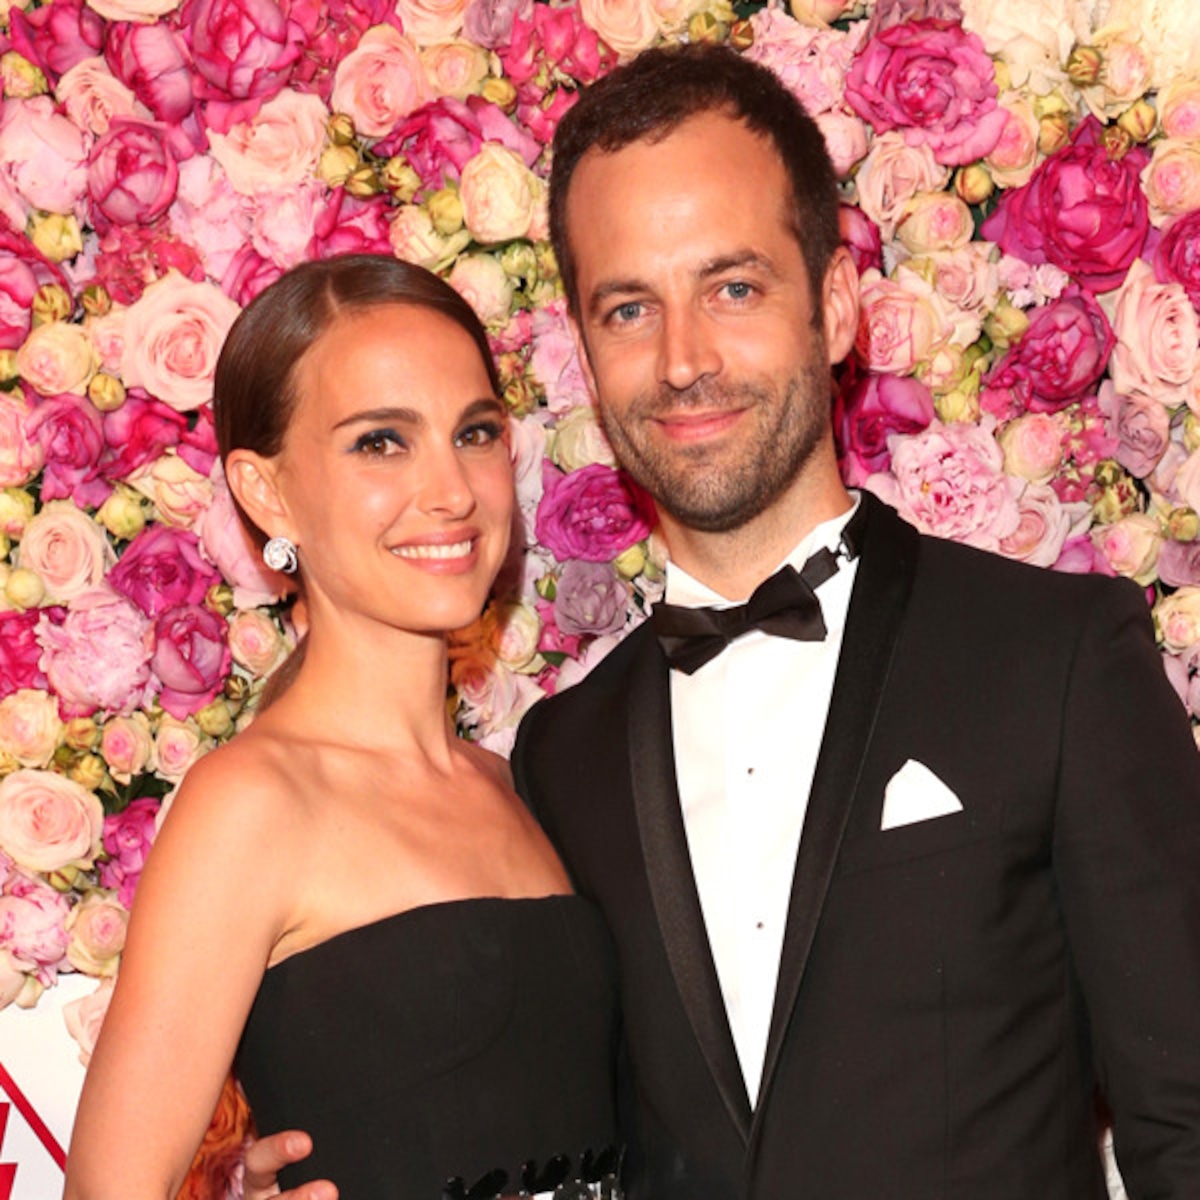 Natalie Portman Gives Birth To Baby No 2 Find Out Her Name E Online Natalie portman and her husband benjamin millepied welcomed a baby girl, amalia millepied, on feb. natalie portman gives birth to baby no